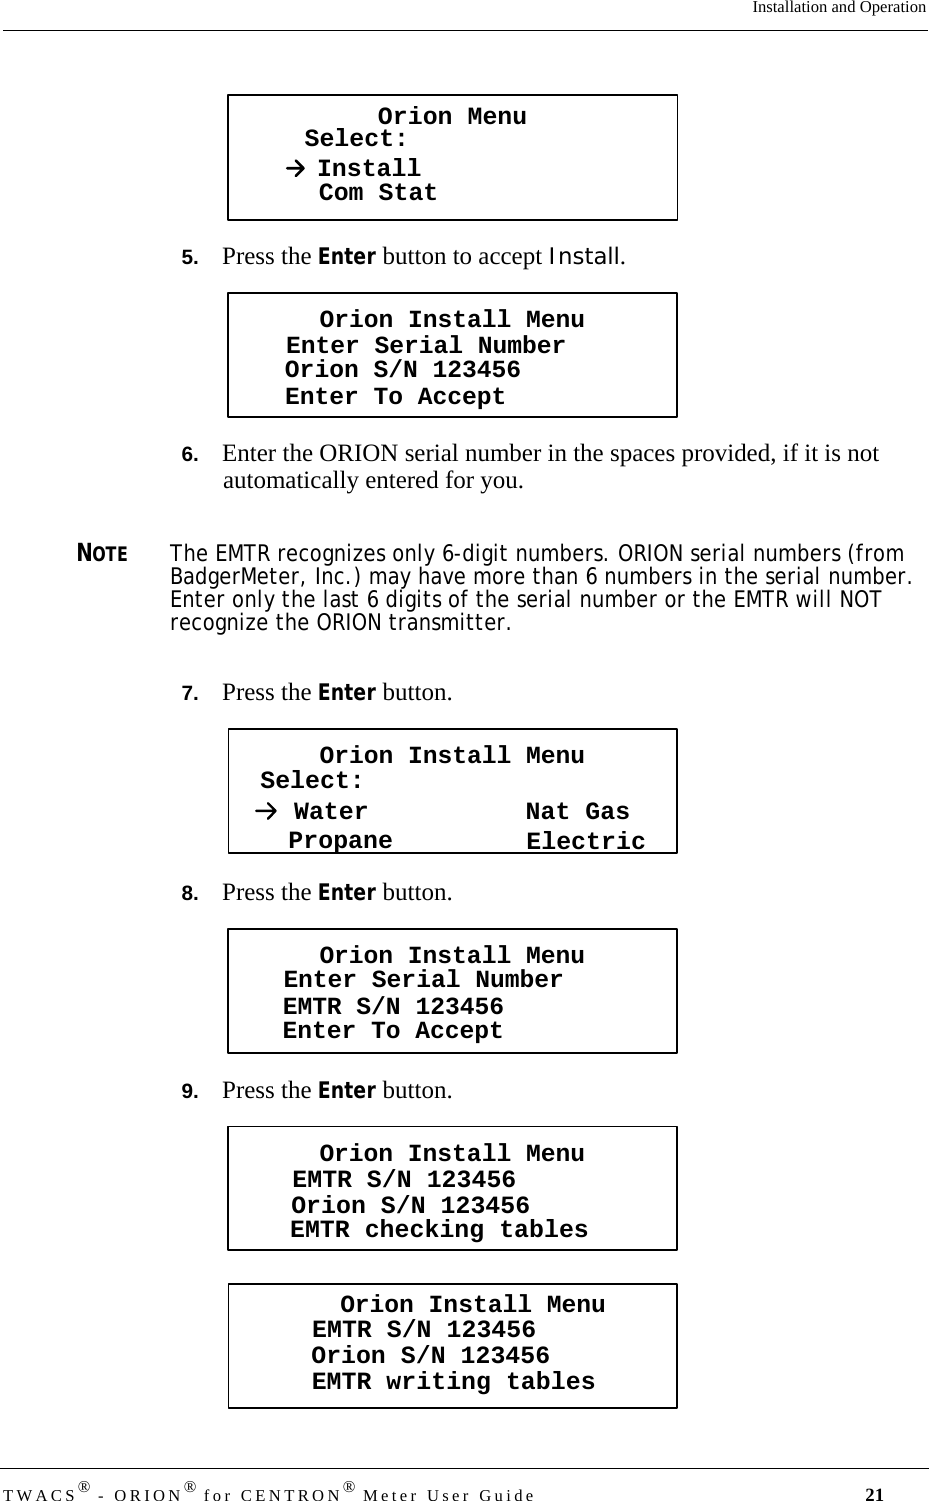 DRAFTTWACS® - ORION® for CENTRON® Meter User Guide 21Installation and Operation5.   Press the Enter button to accept Install.6.   Enter the ORION serial number in the spaces provided, if it is not automatically entered for you.NOTEThe EMTR recognizes only 6-digit numbers. ORION serial numbers (from BadgerMeter, Inc.) may have more than 6 numbers in the serial number. Enter only the last 6 digits of the serial number or the EMTR will NOT recognize the ORION transmitter.7.   Press the Enter button.8.   Press the Enter button.9.   Press the Enter button.Orion MenuSelect:InstallCom StatOrion Install MenuEnter Serial NumberEnter To AcceptOrion S/N 123456Orion Install MenuSelect:PropaneWaterElectricNat GasOrion Install MenuEnter Serial NumberEnter To AcceptEMTR S/N 123456Orion Install MenuEMTR checking tablesEMTR S/N 123456Orion S/N 123456Orion Install MenuEMTR writing tablesEMTR S/N 123456Orion S/N 123456